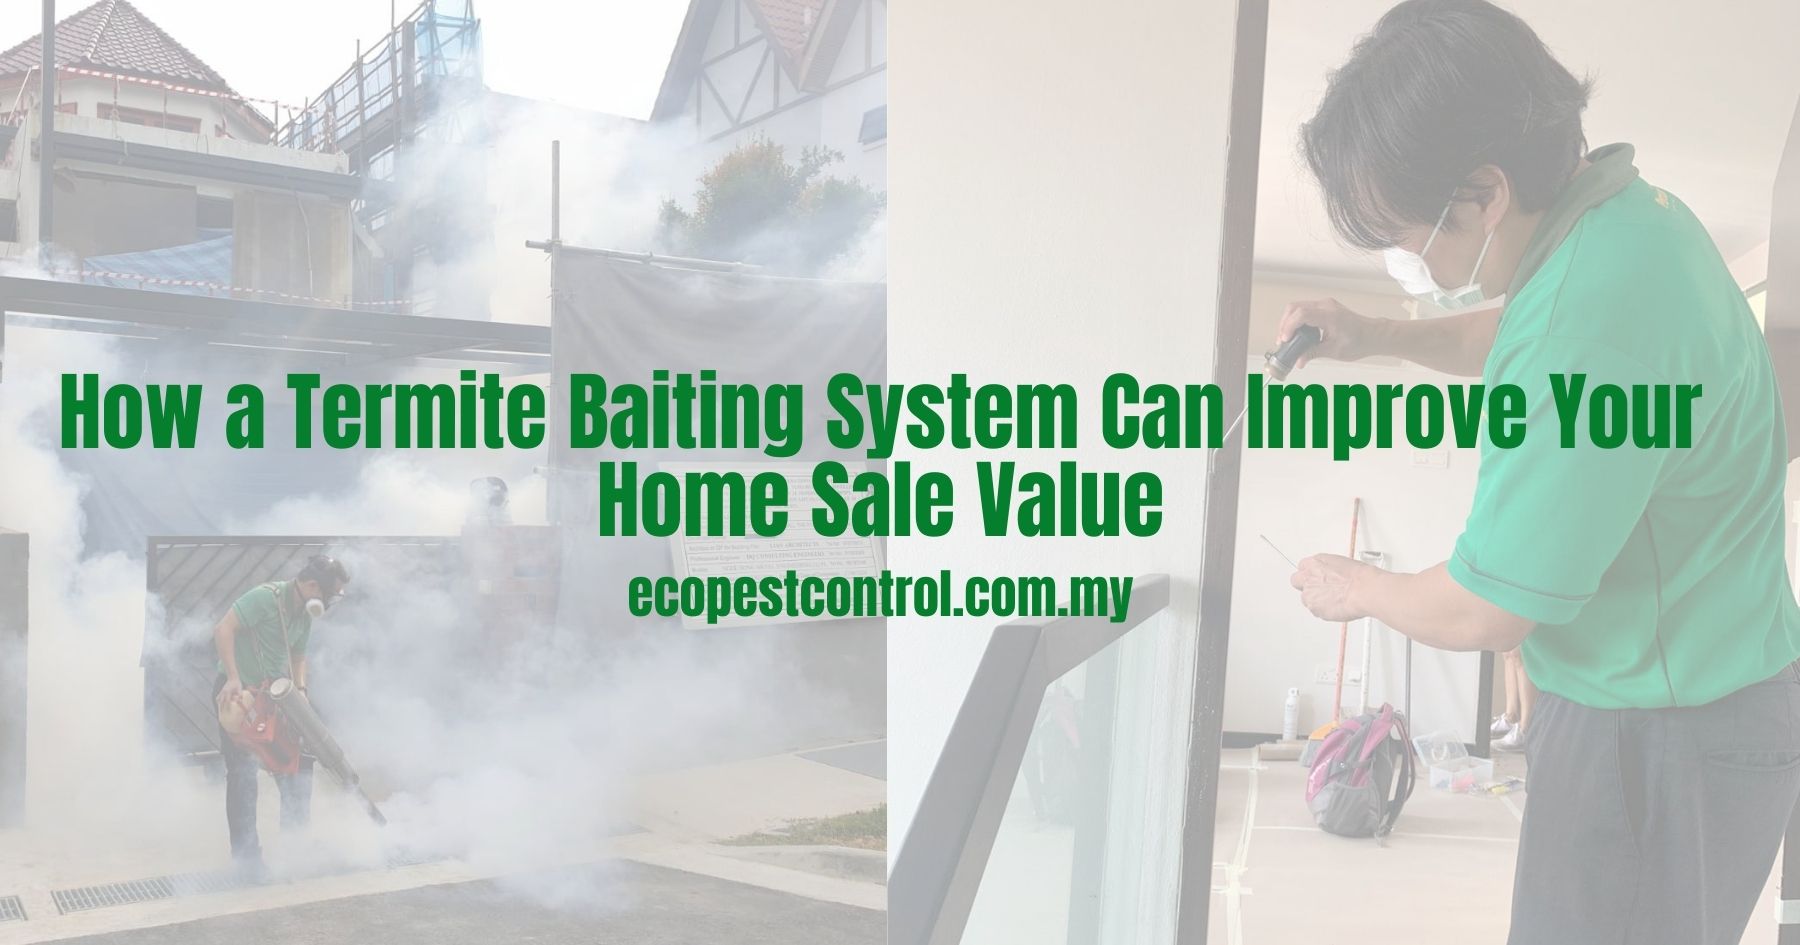 How a Termite Baiting System Can Improve Your Home Sale Value